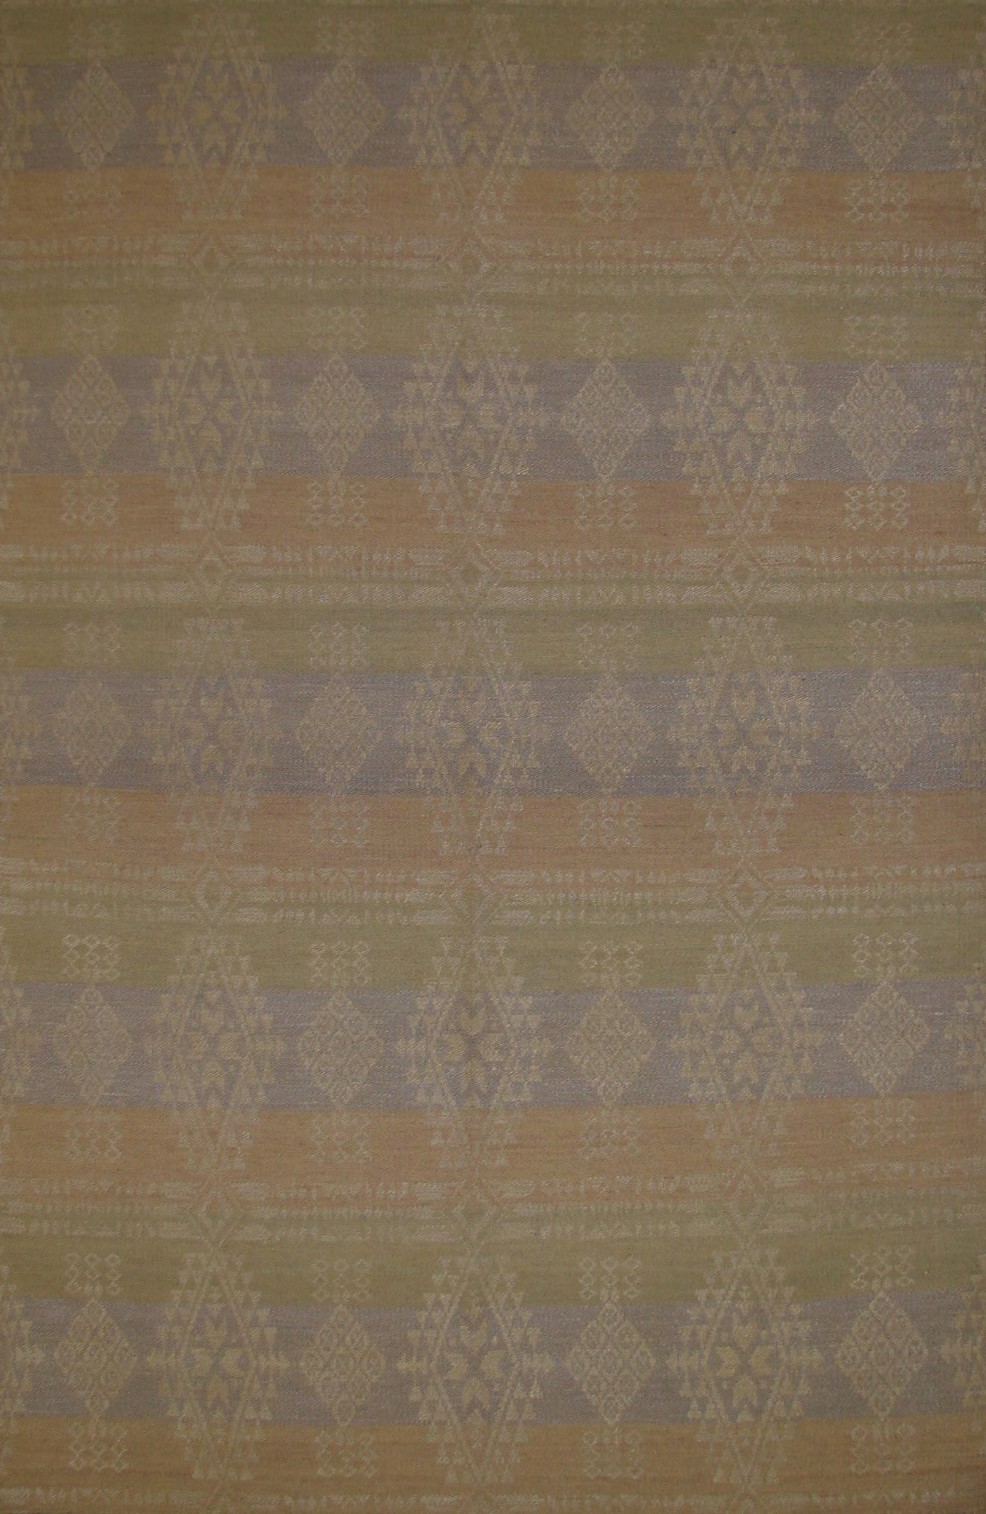 Woven Rugs DH-WV SD-21 WB Ivory - Beige & Multi Flat weave Rug